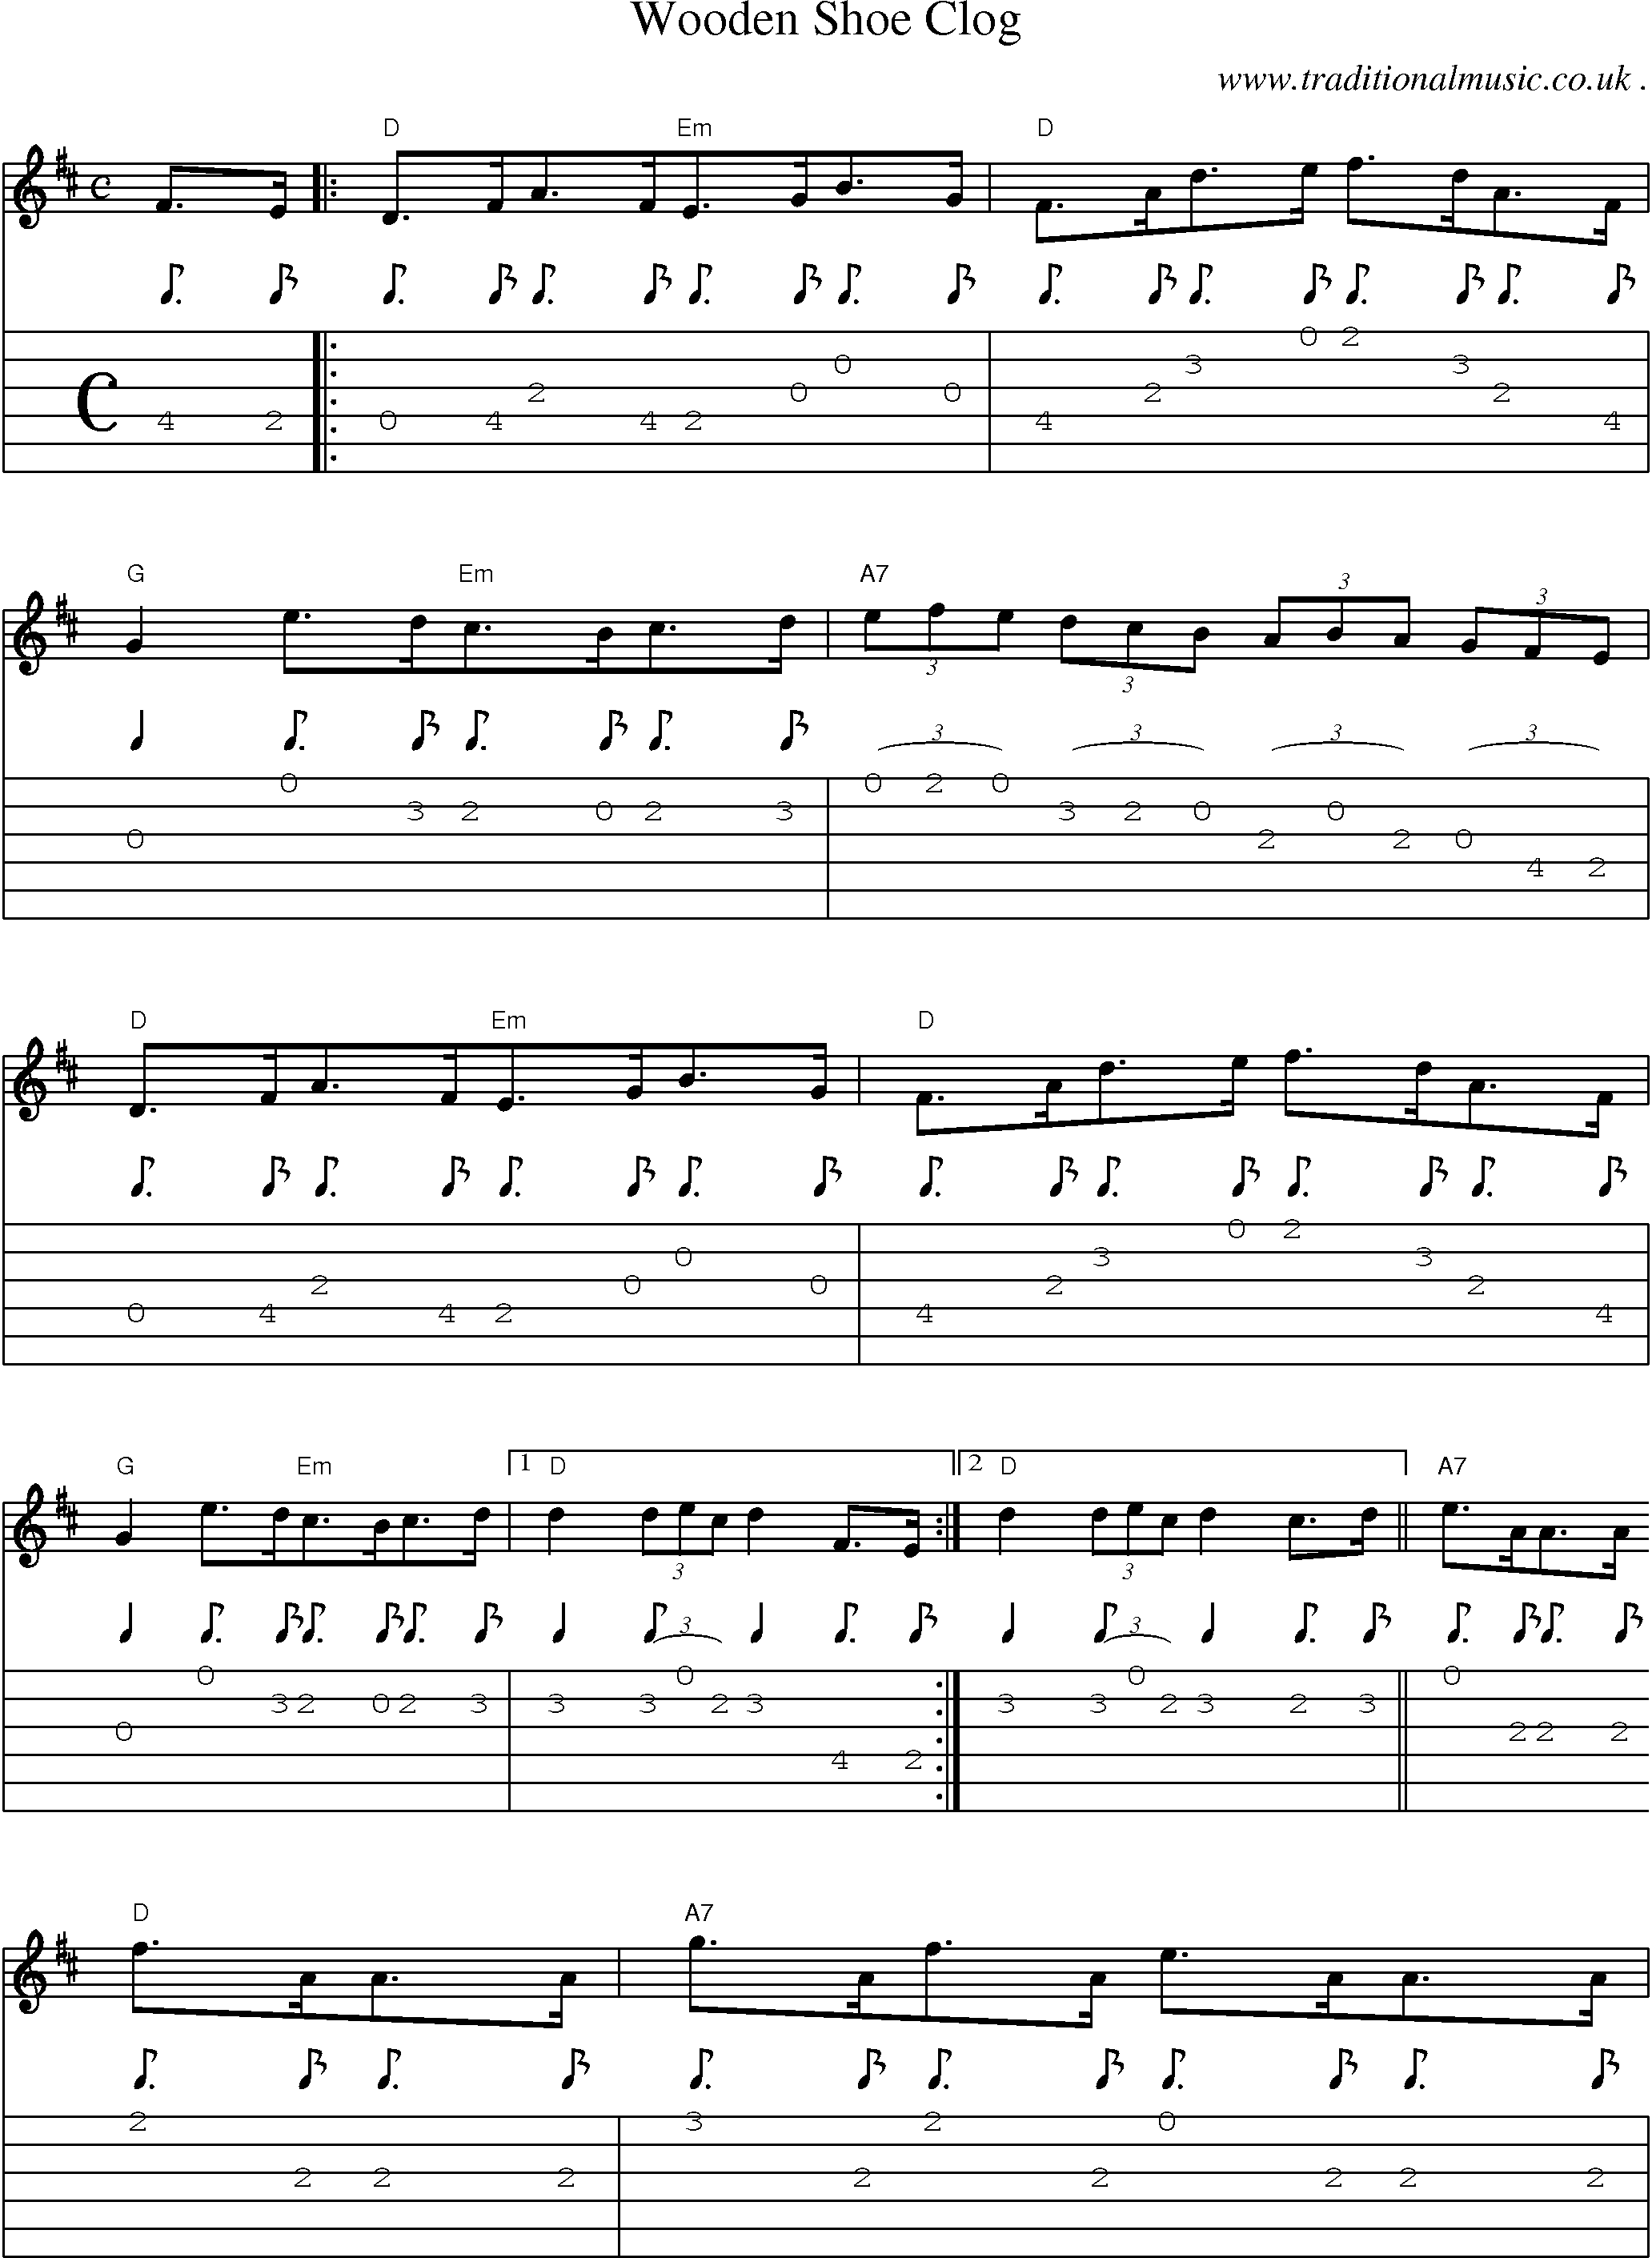 Sheet-Music and Guitar Tabs for Wooden Shoe Clog